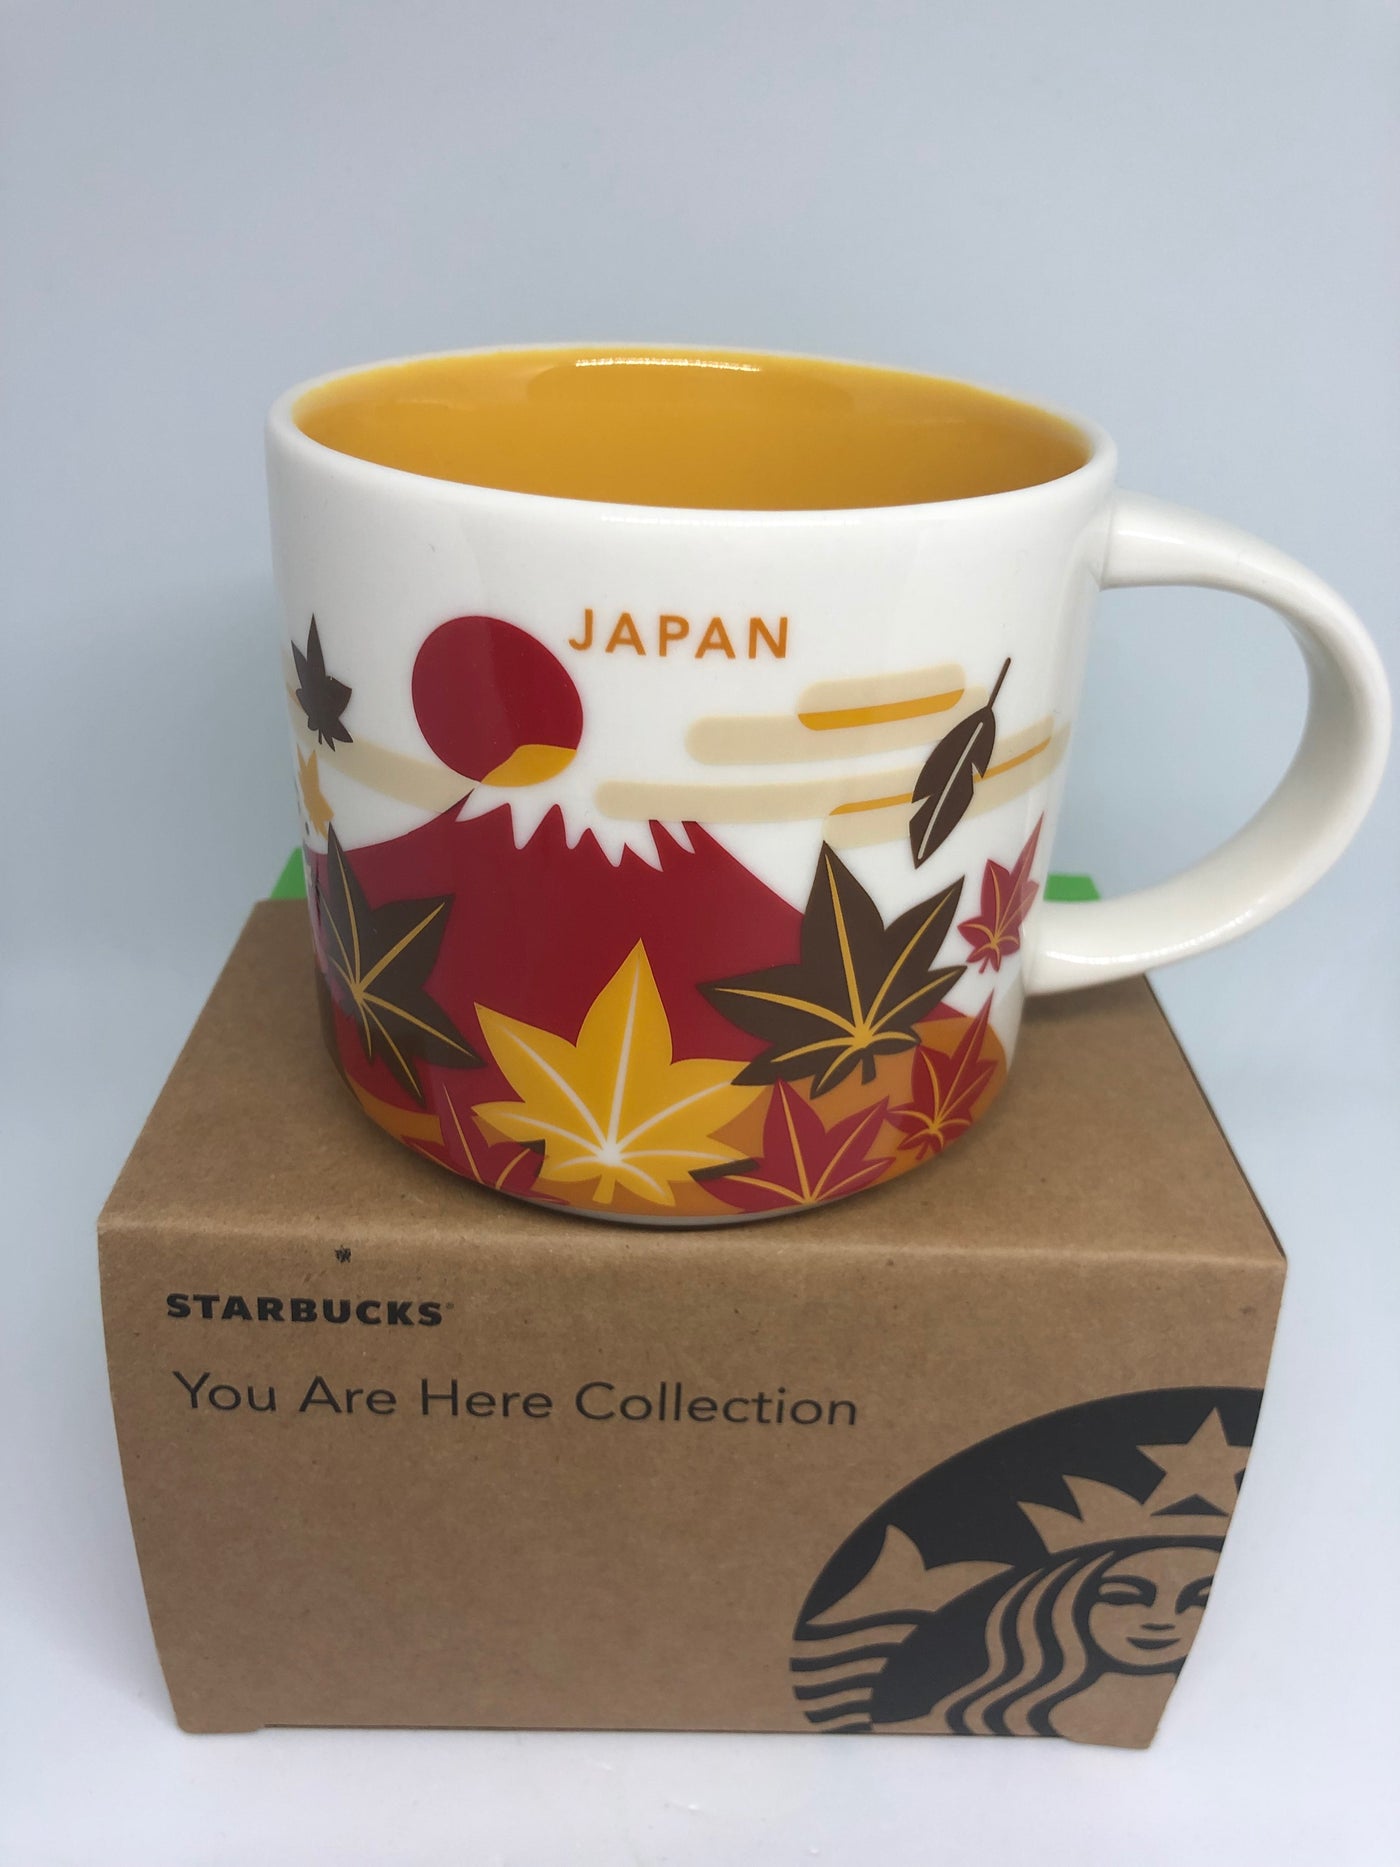 Starbucks You Are Here Collection Japan Fall Ceramic Coffee Mug New with Box